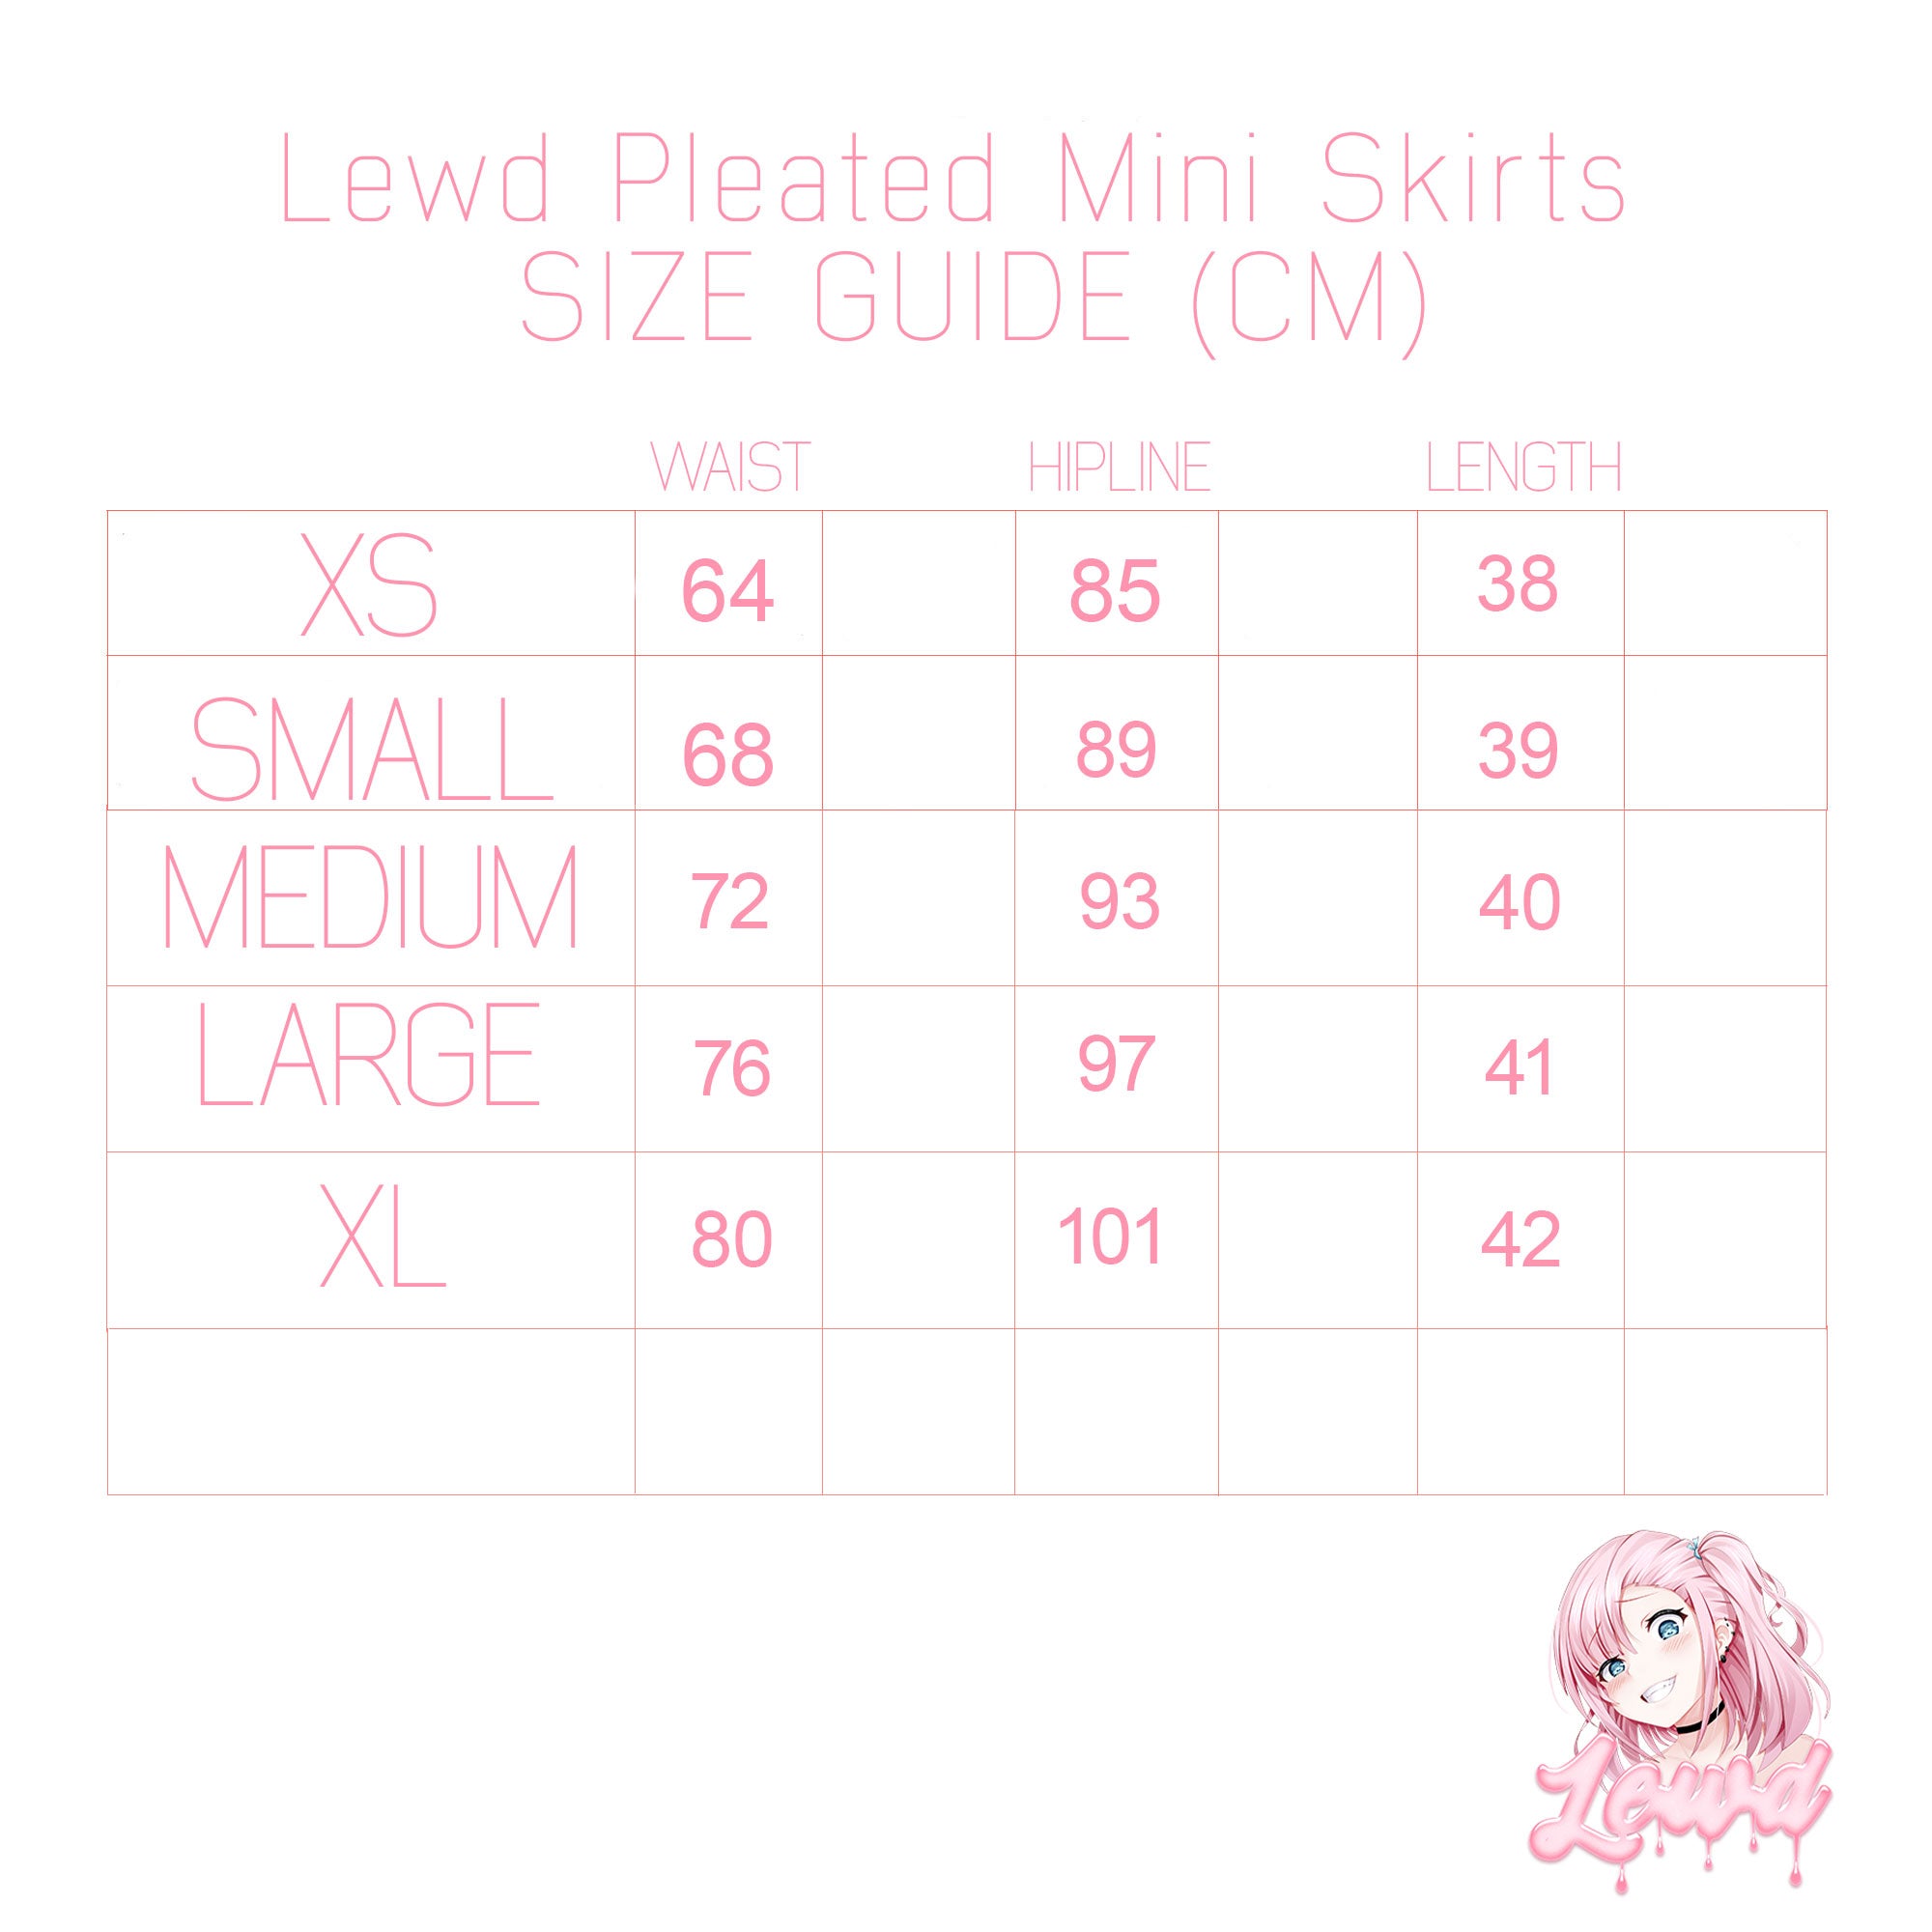 Lewd Pleated Mini Skirts Size Guide